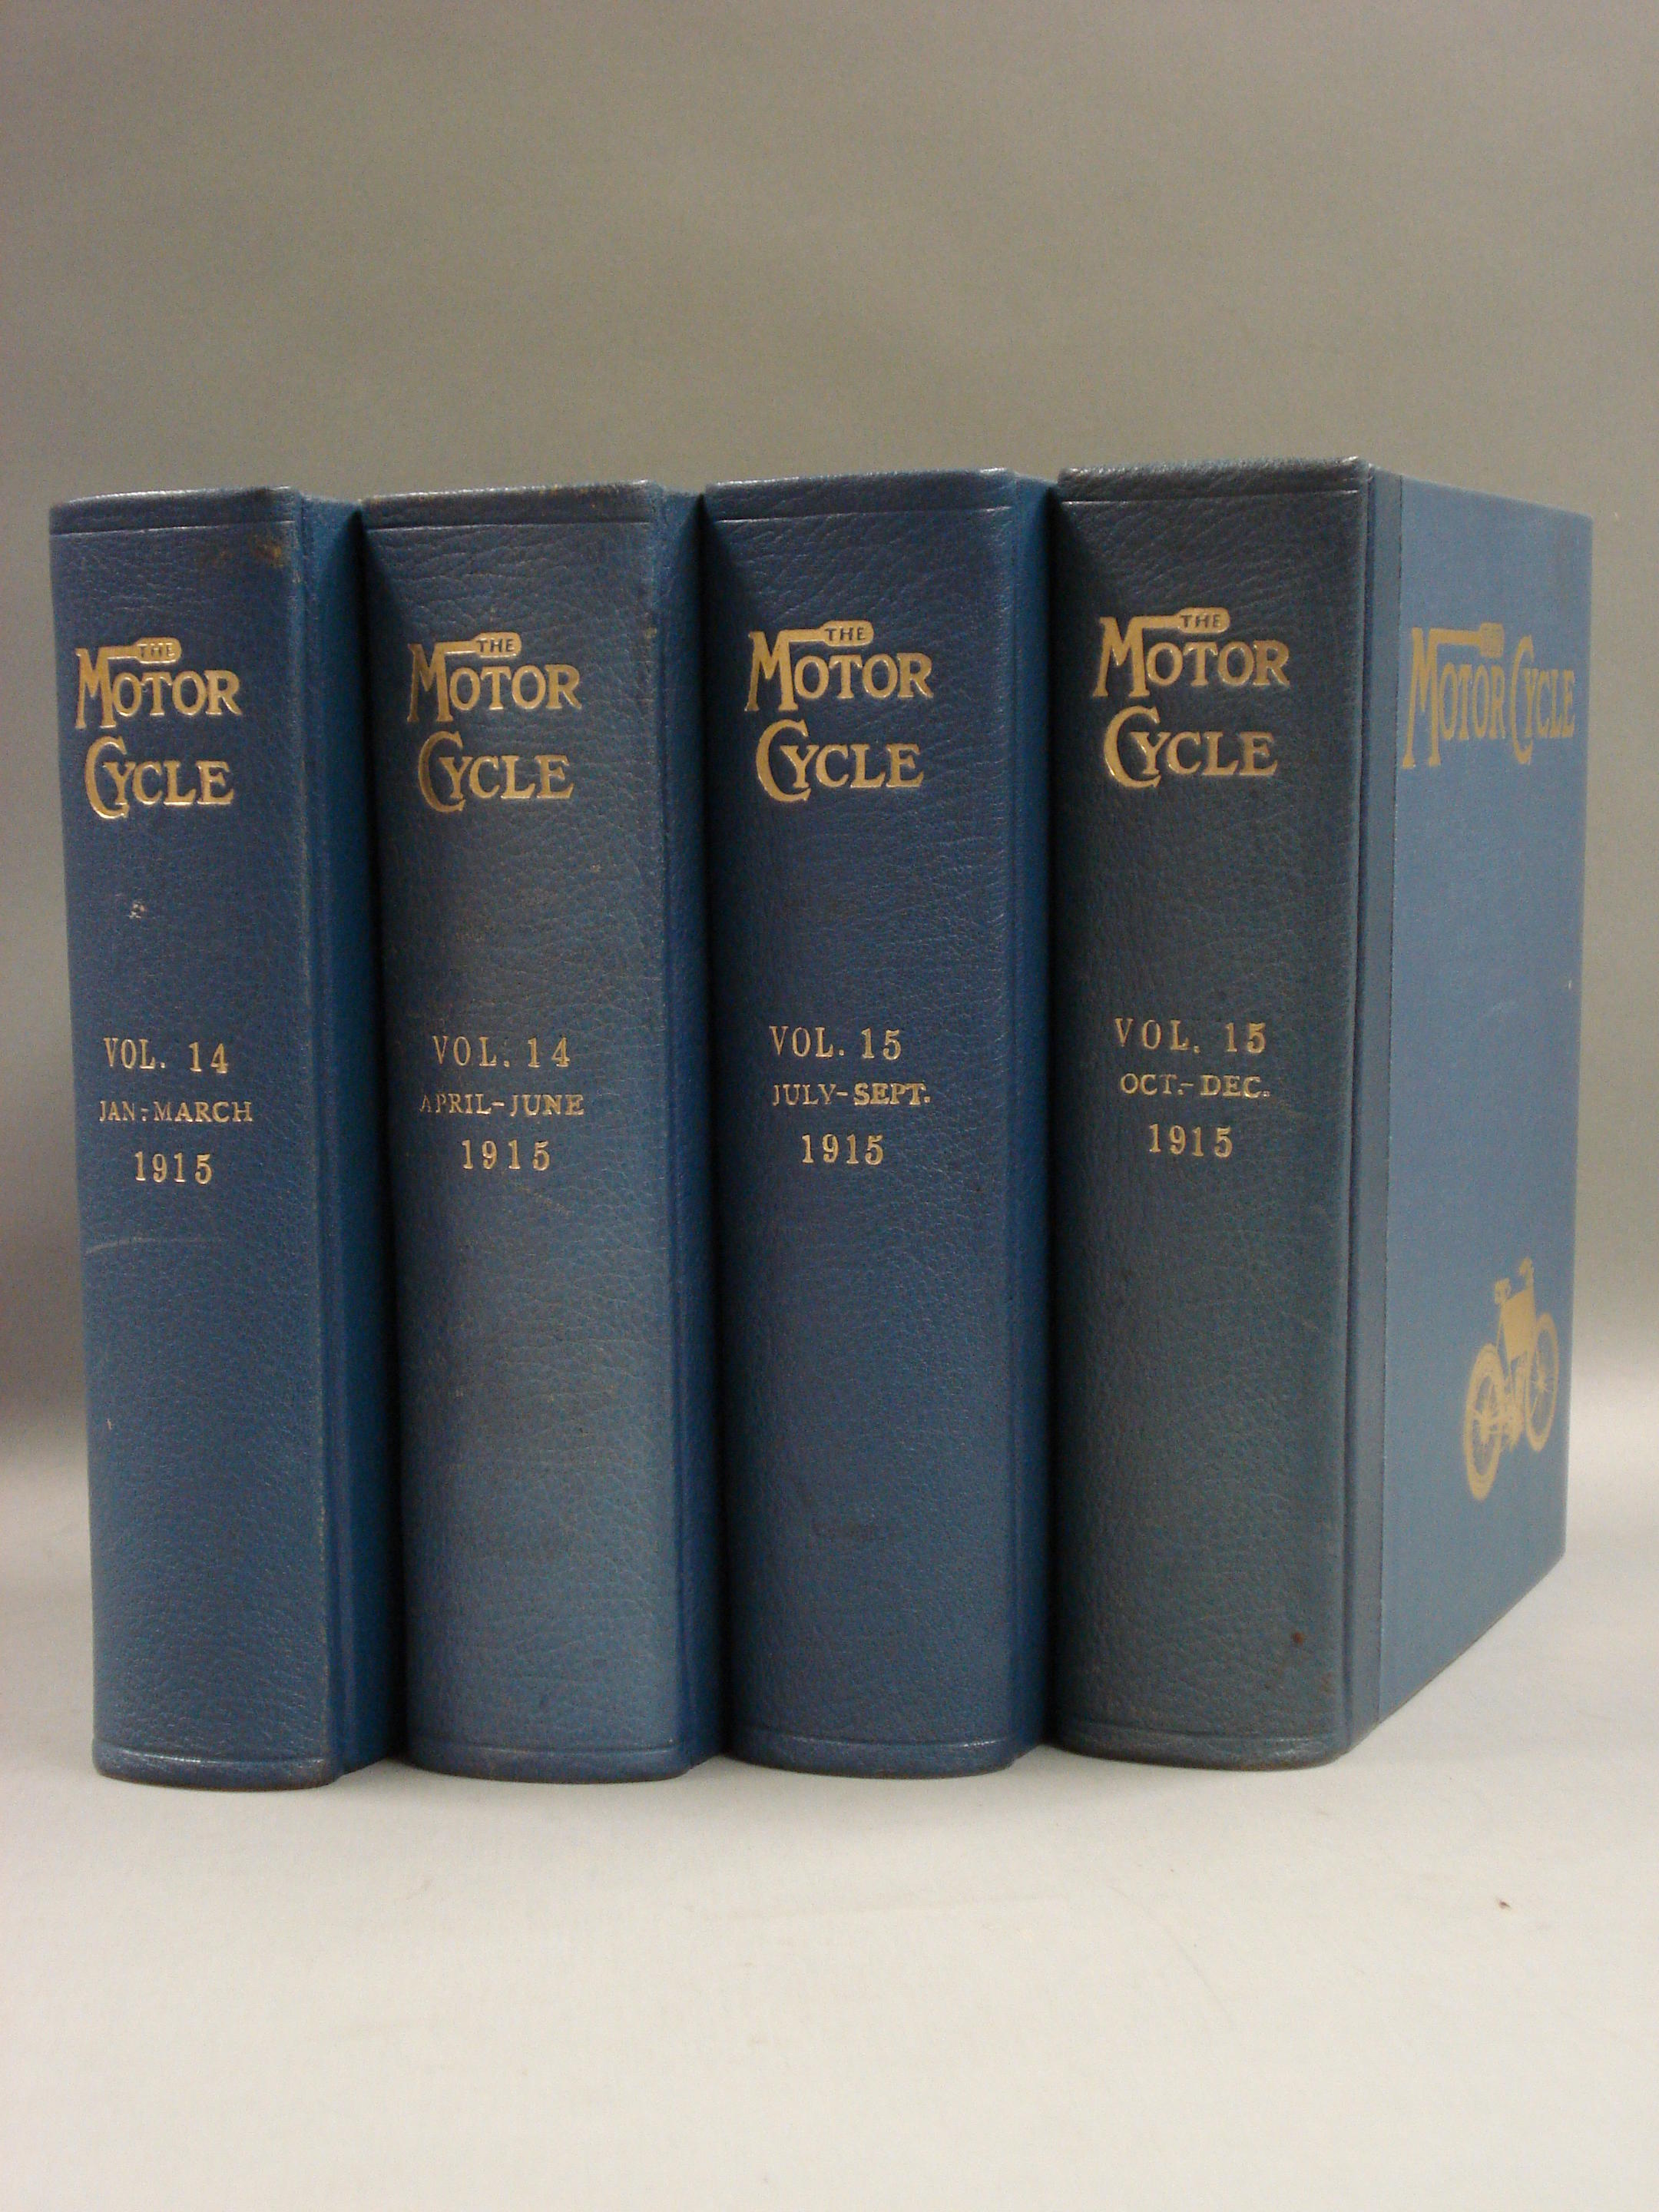 The Motor Cycle - Volumes 14 and 15, 1915